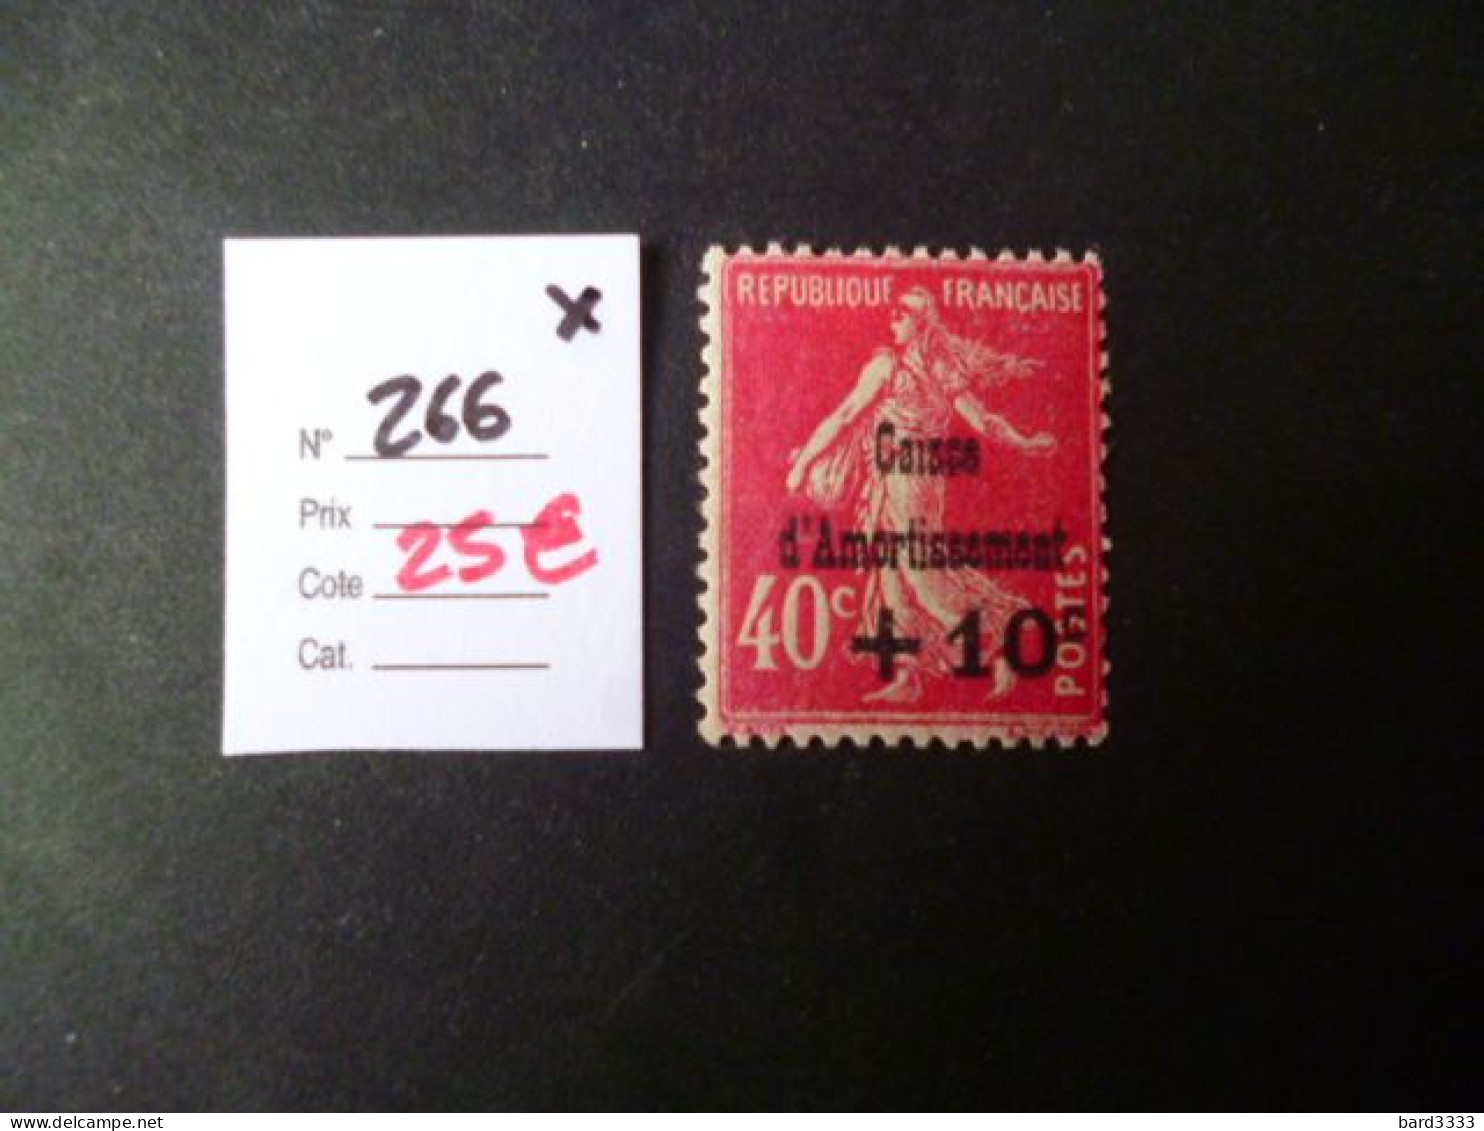 Timbre France Neuf * Caisse Amortissement N° 266 Cote 25  € - Nuovi